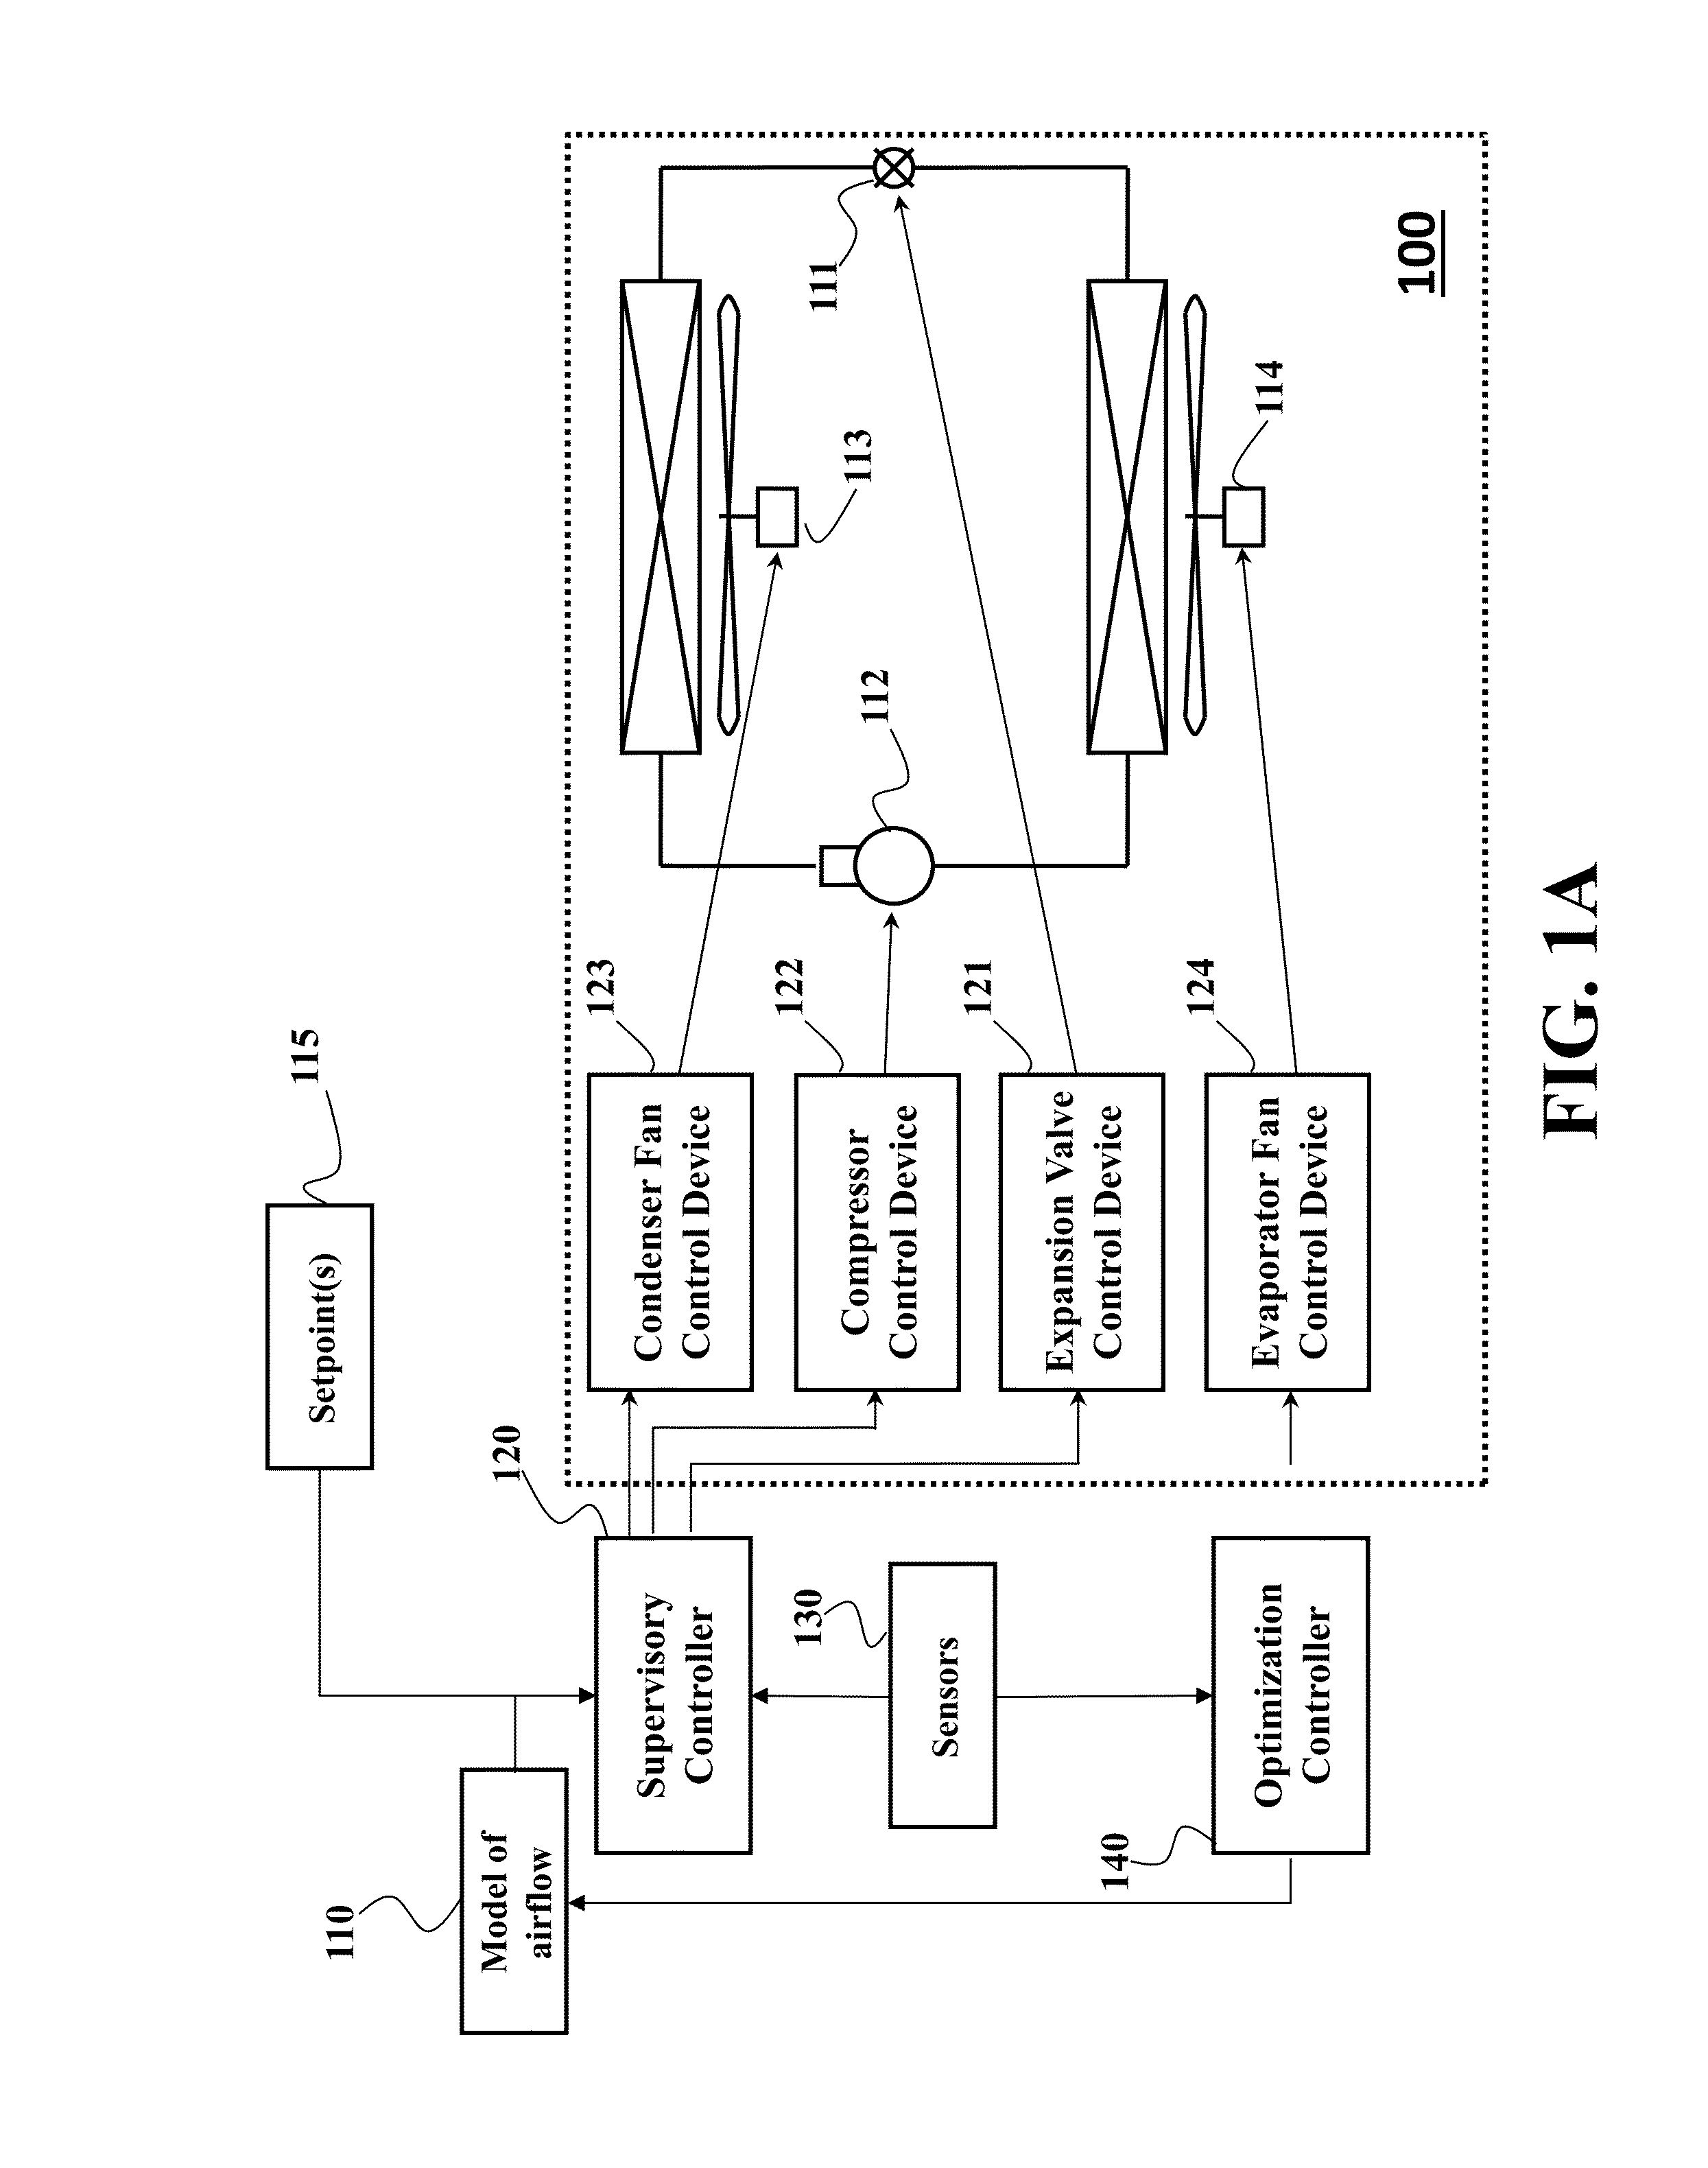 System and Method for Controlling Operations of Air-Conditioning System